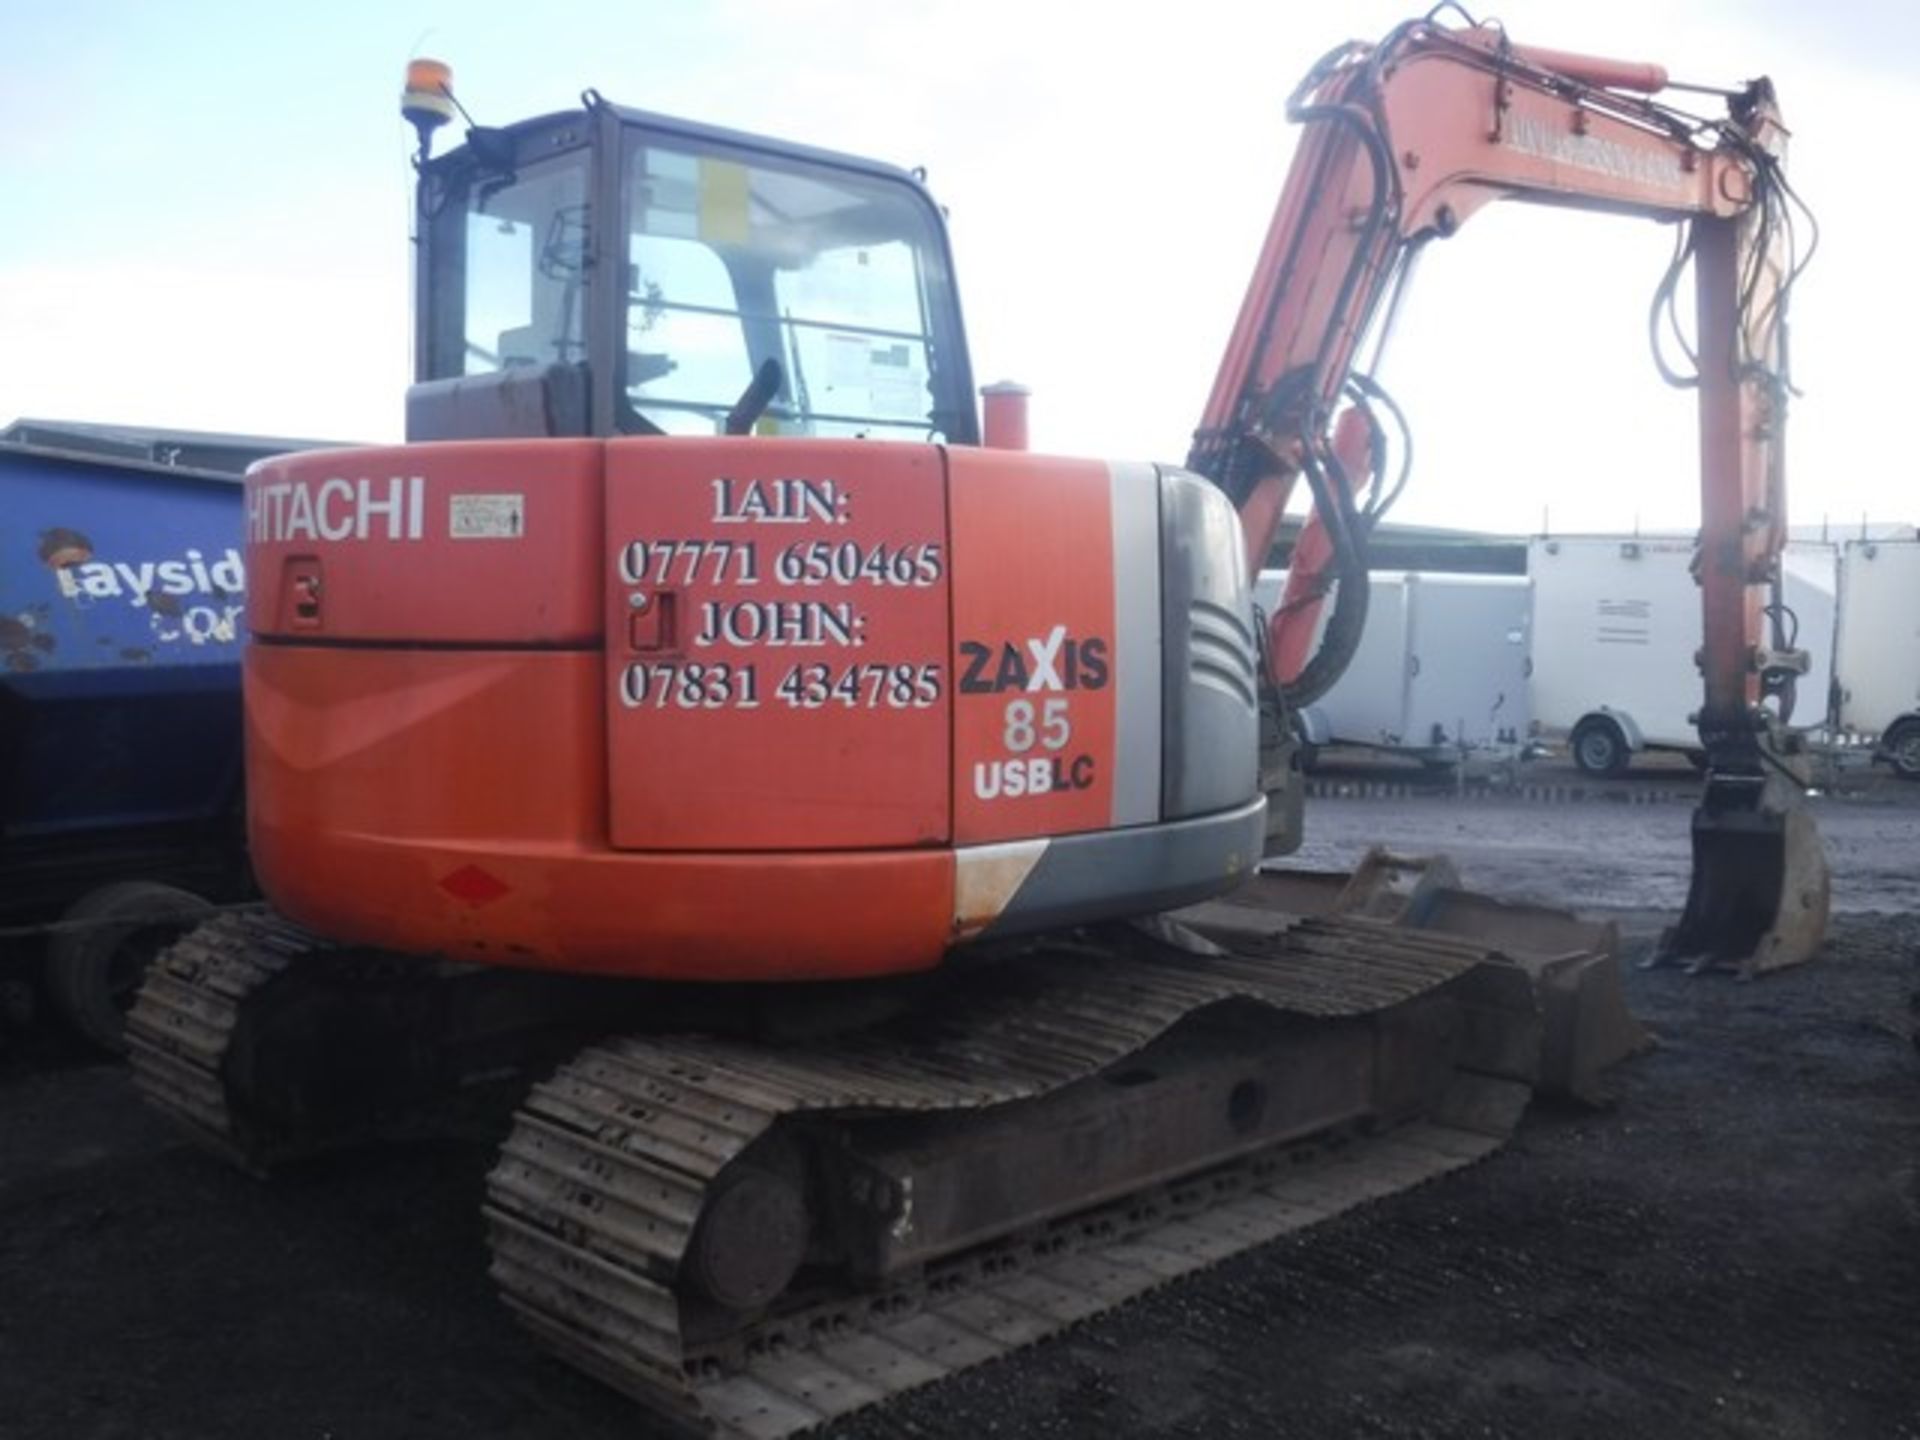 2009 HITACHI 360 EXCAVATOR ZAXIS 85 C/W 3 BUCKETS AND QUICK HITCH 6441HRS (NOT VERIFIED) - Image 5 of 27